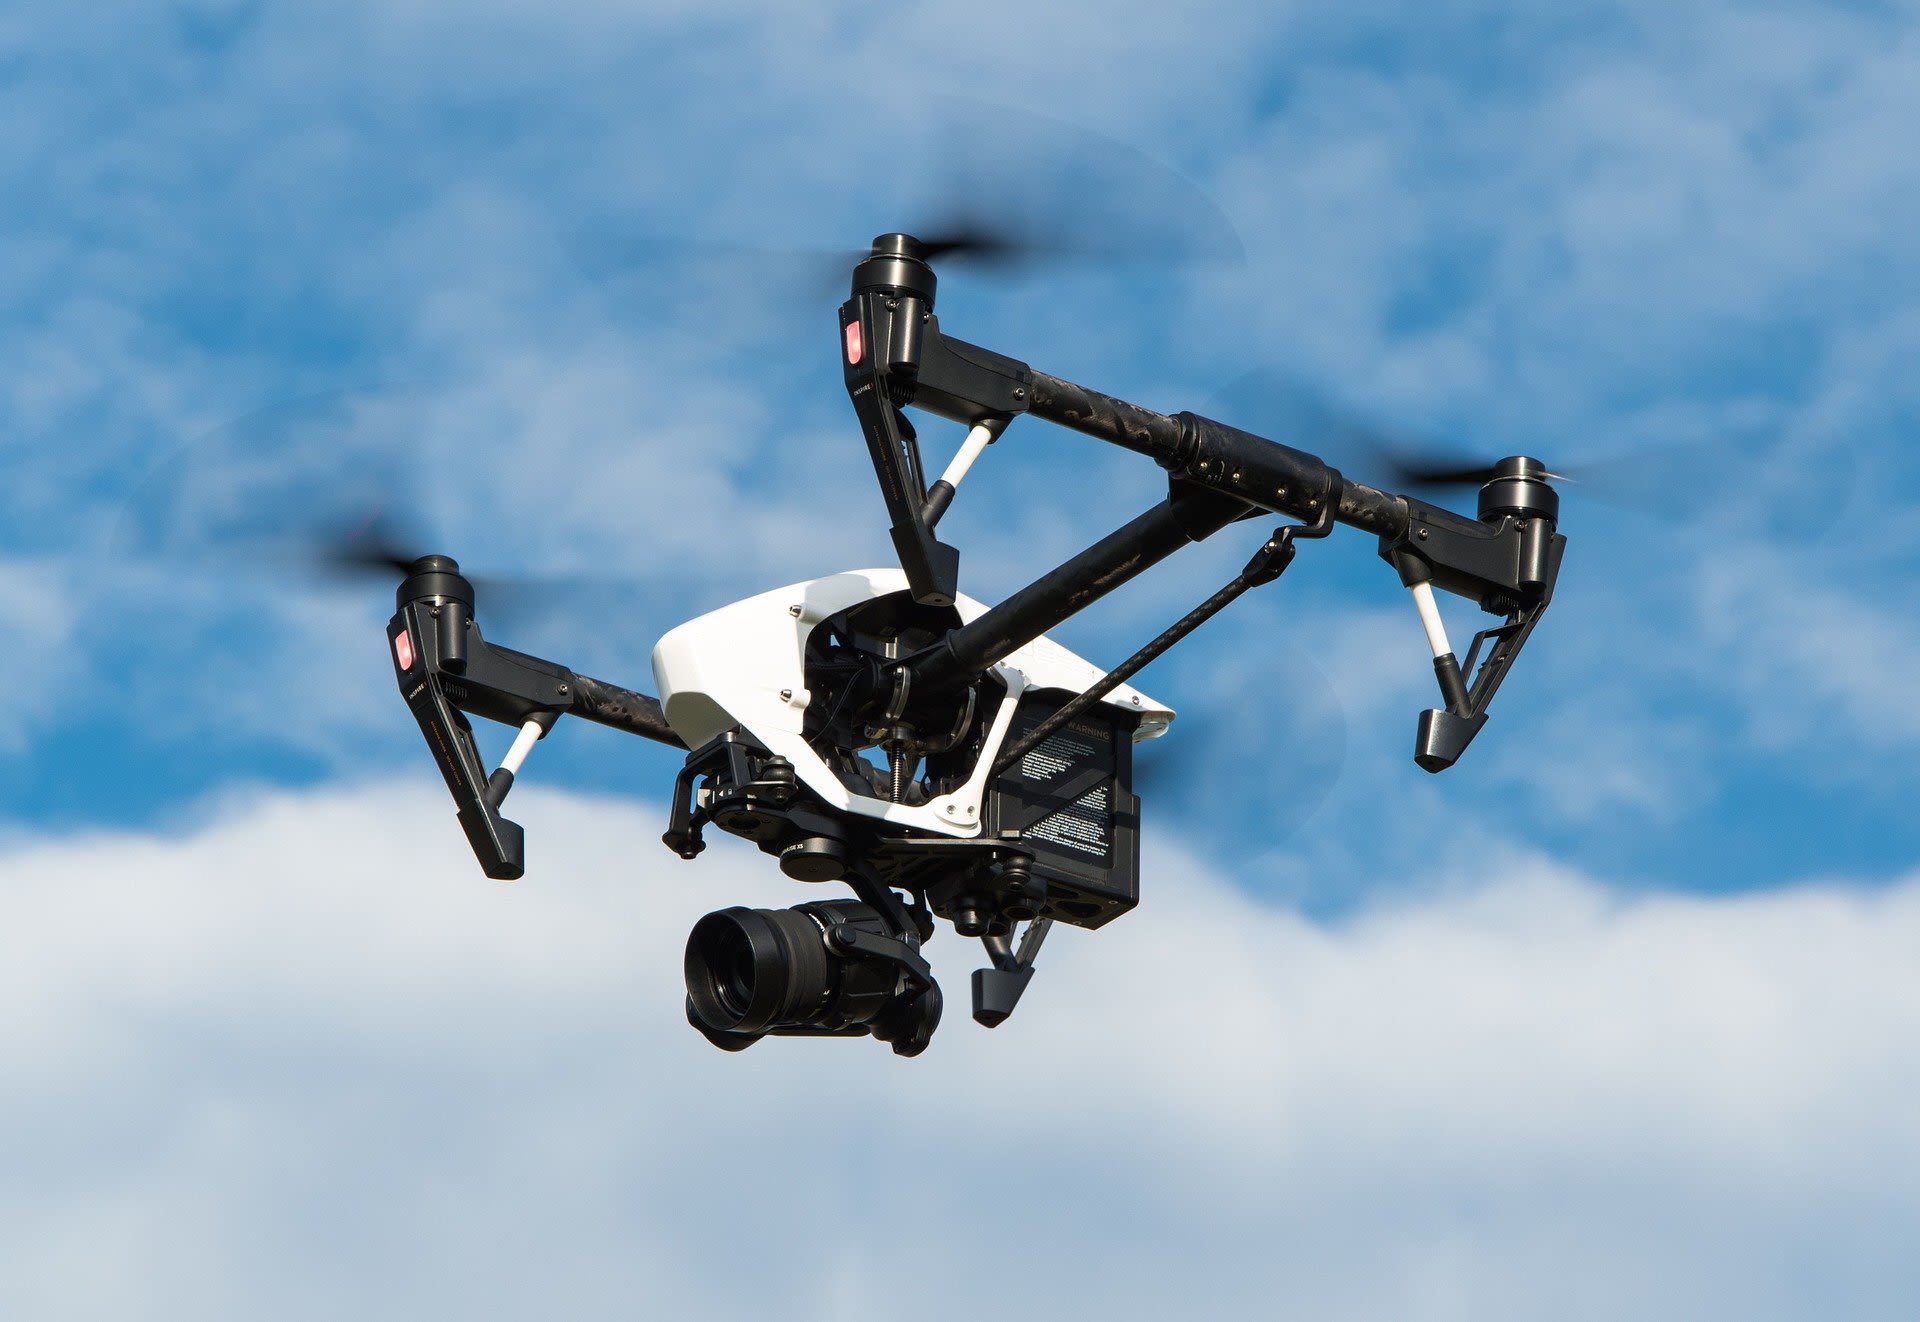 Drones could revolutionize the construction industry, supporting a new UK housing boom